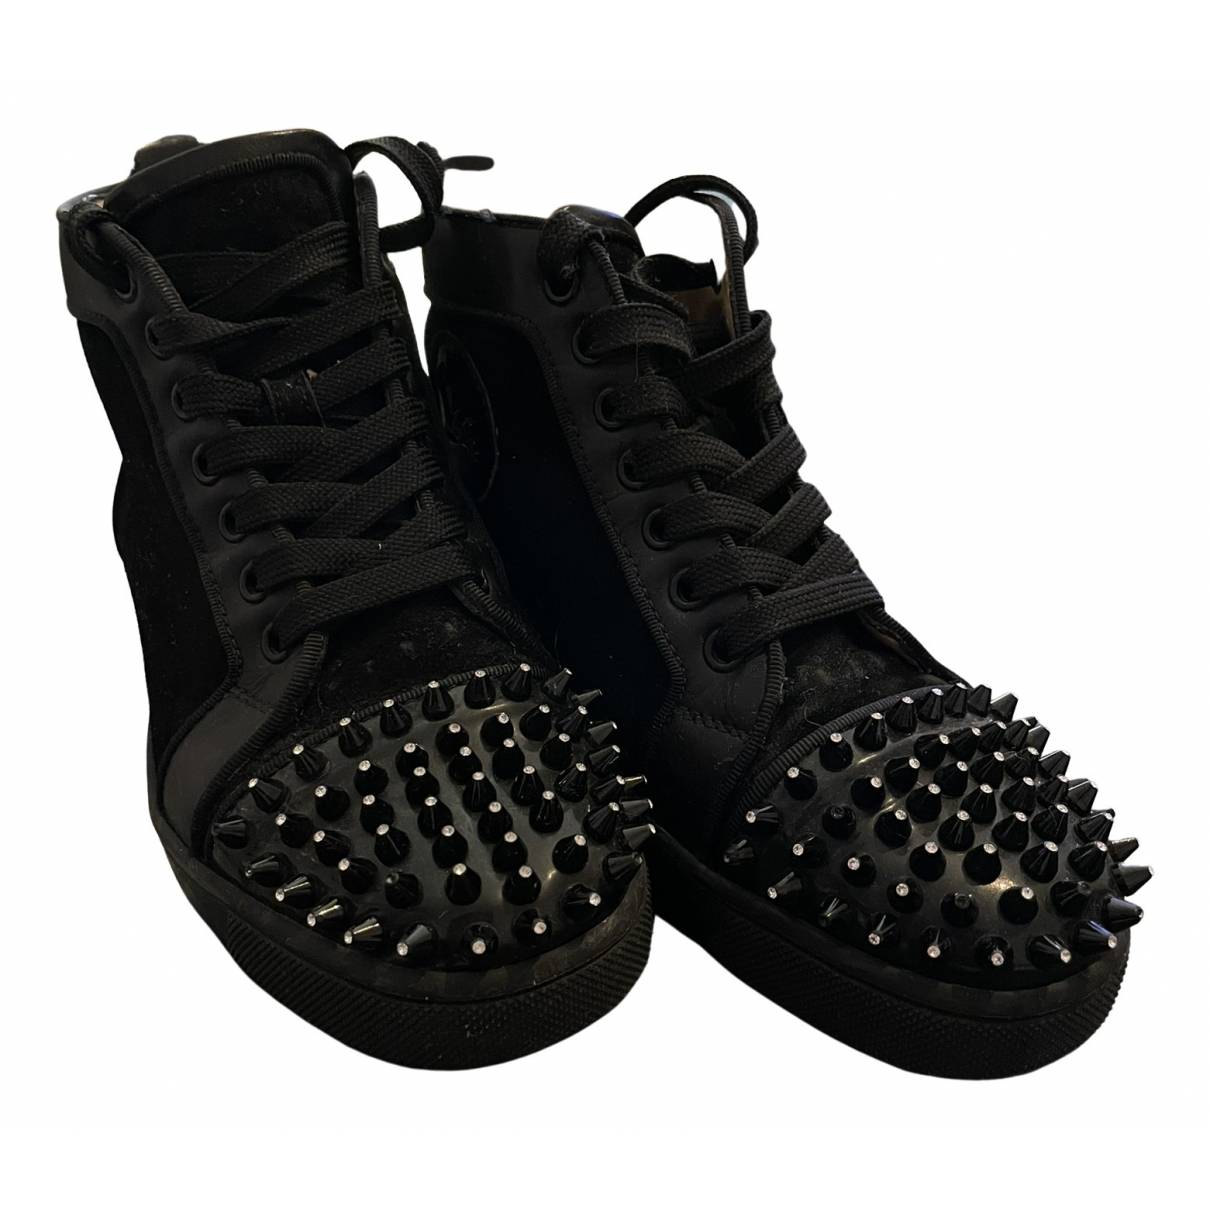 Christian Louboutin, Lou Spikes pink suede sneakers